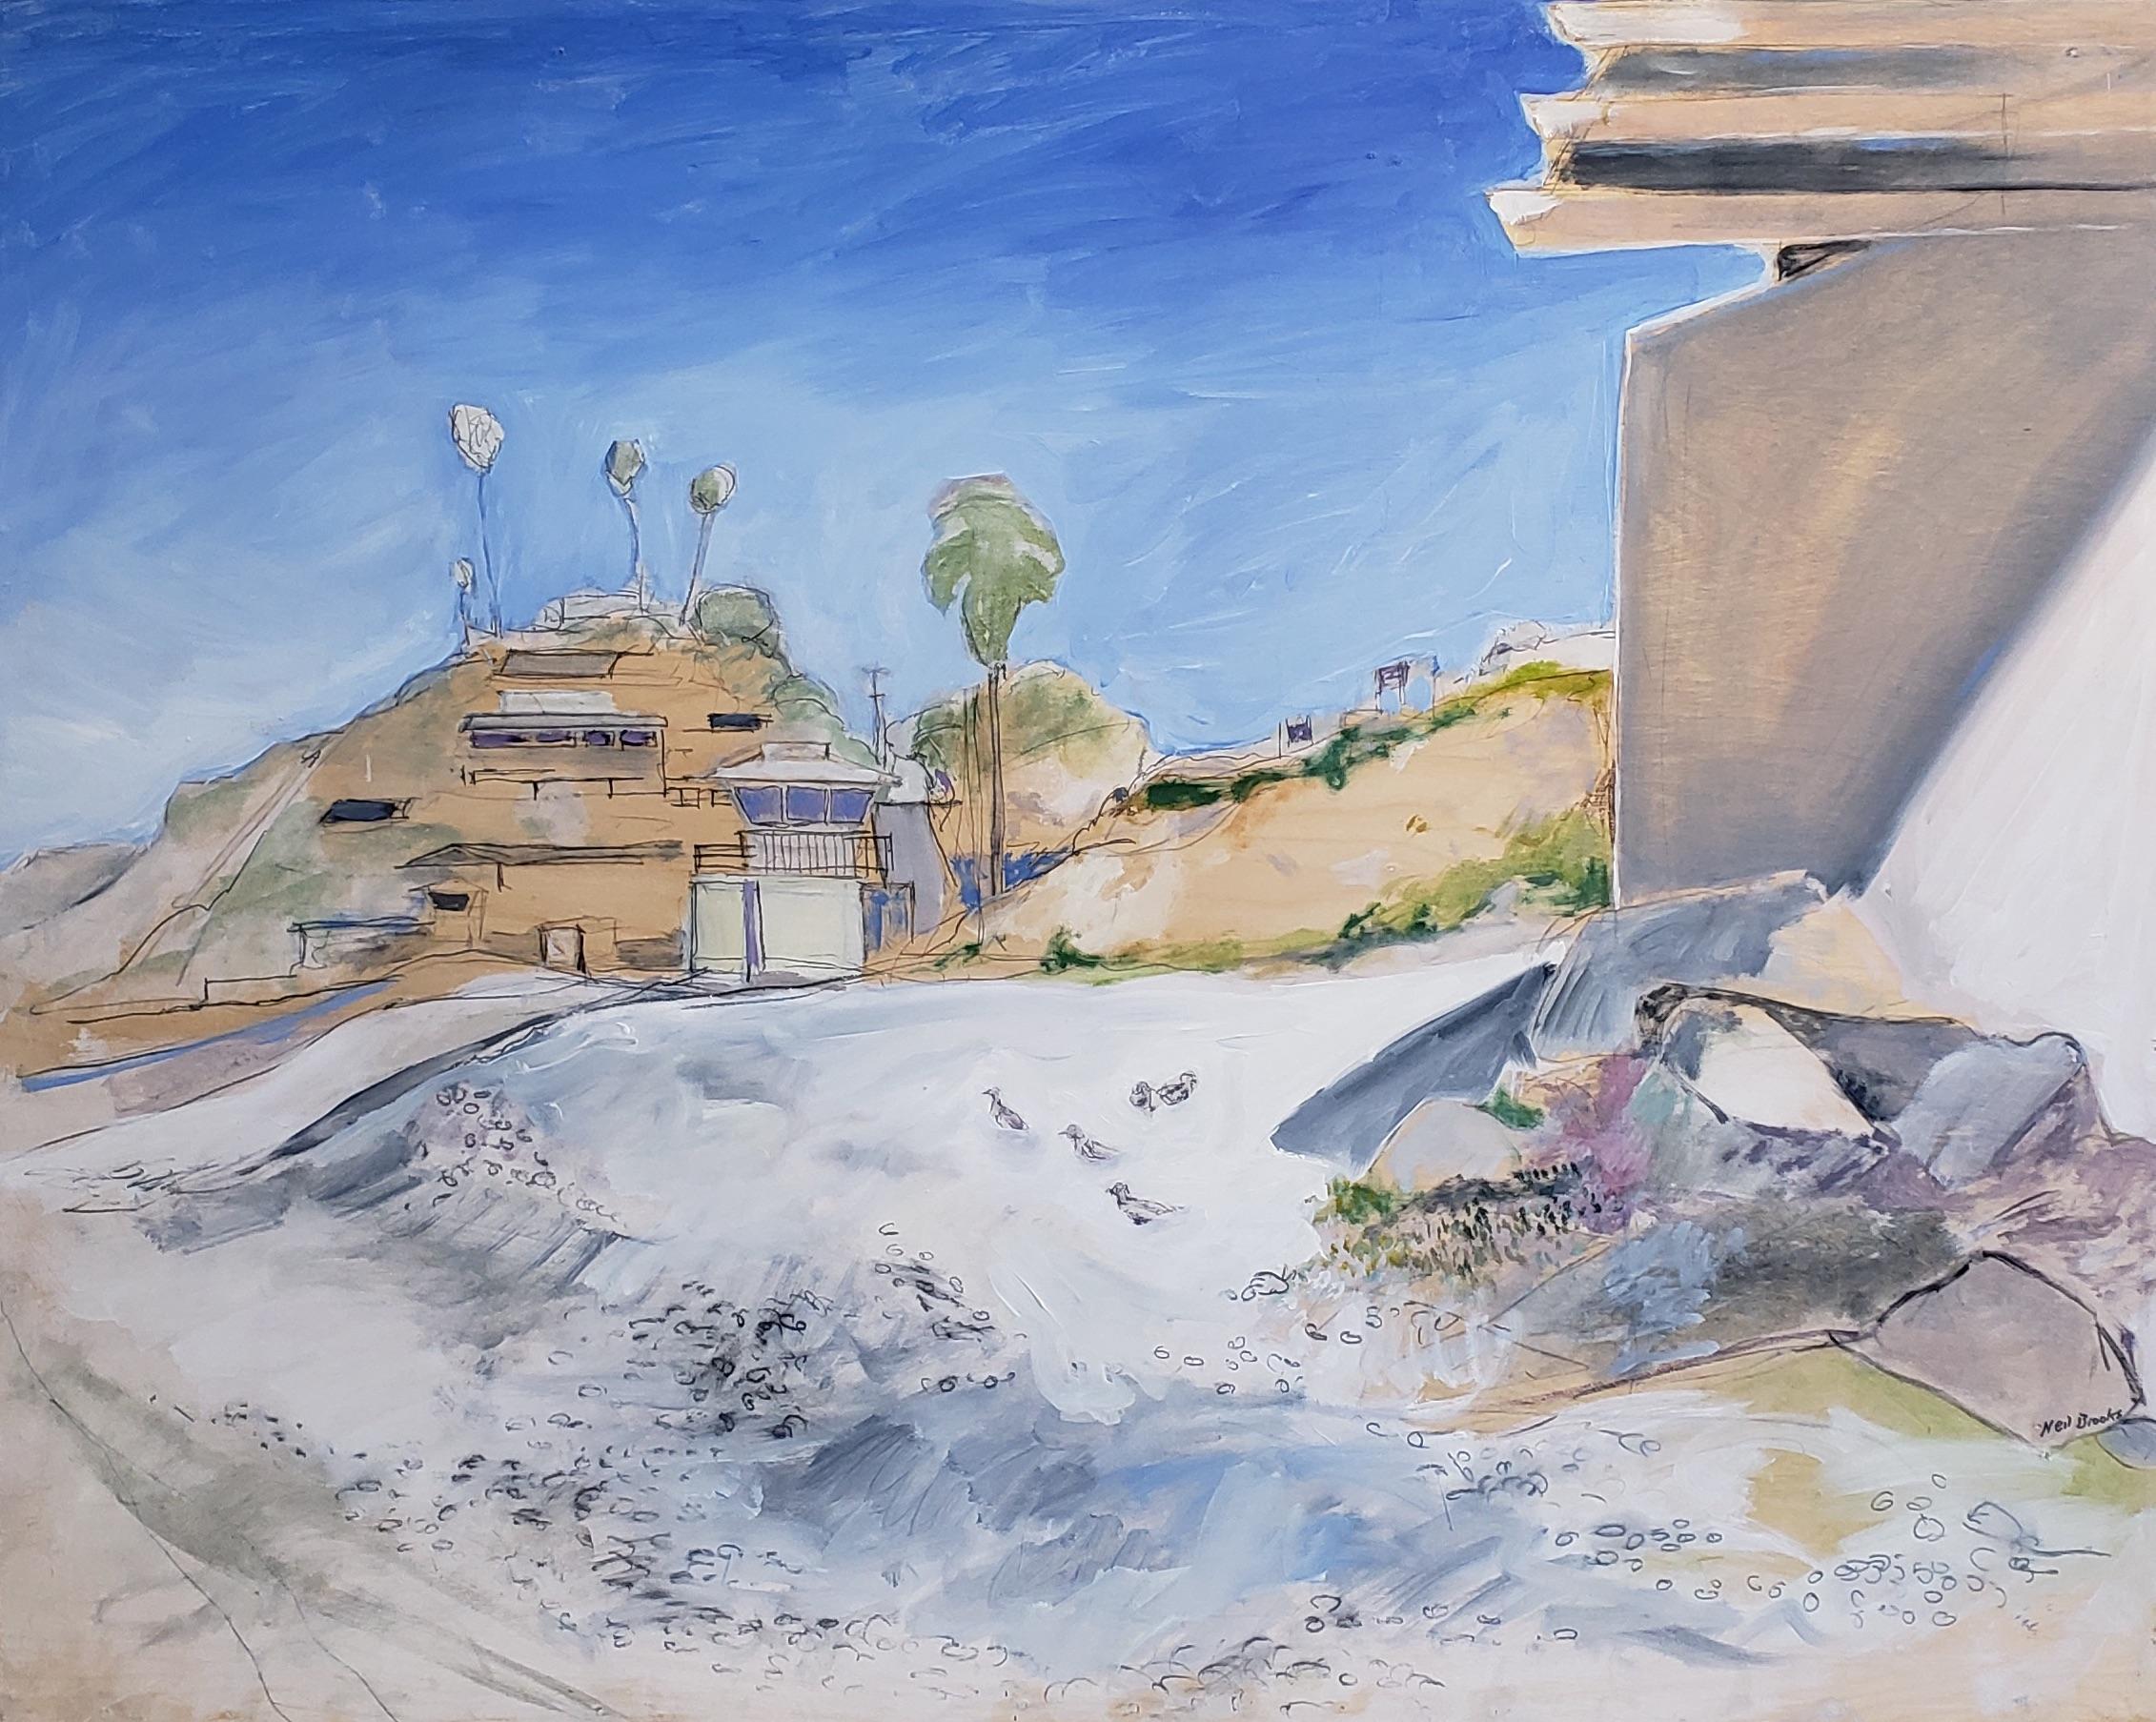 Neil Brooks conveys the essence of San Diego in his vibrant large-scale paintings. Starting with quick sketches on-site, he then develops ideas on large canvases stretched over his studio wall. He holds off on finishing his paintings for as long as